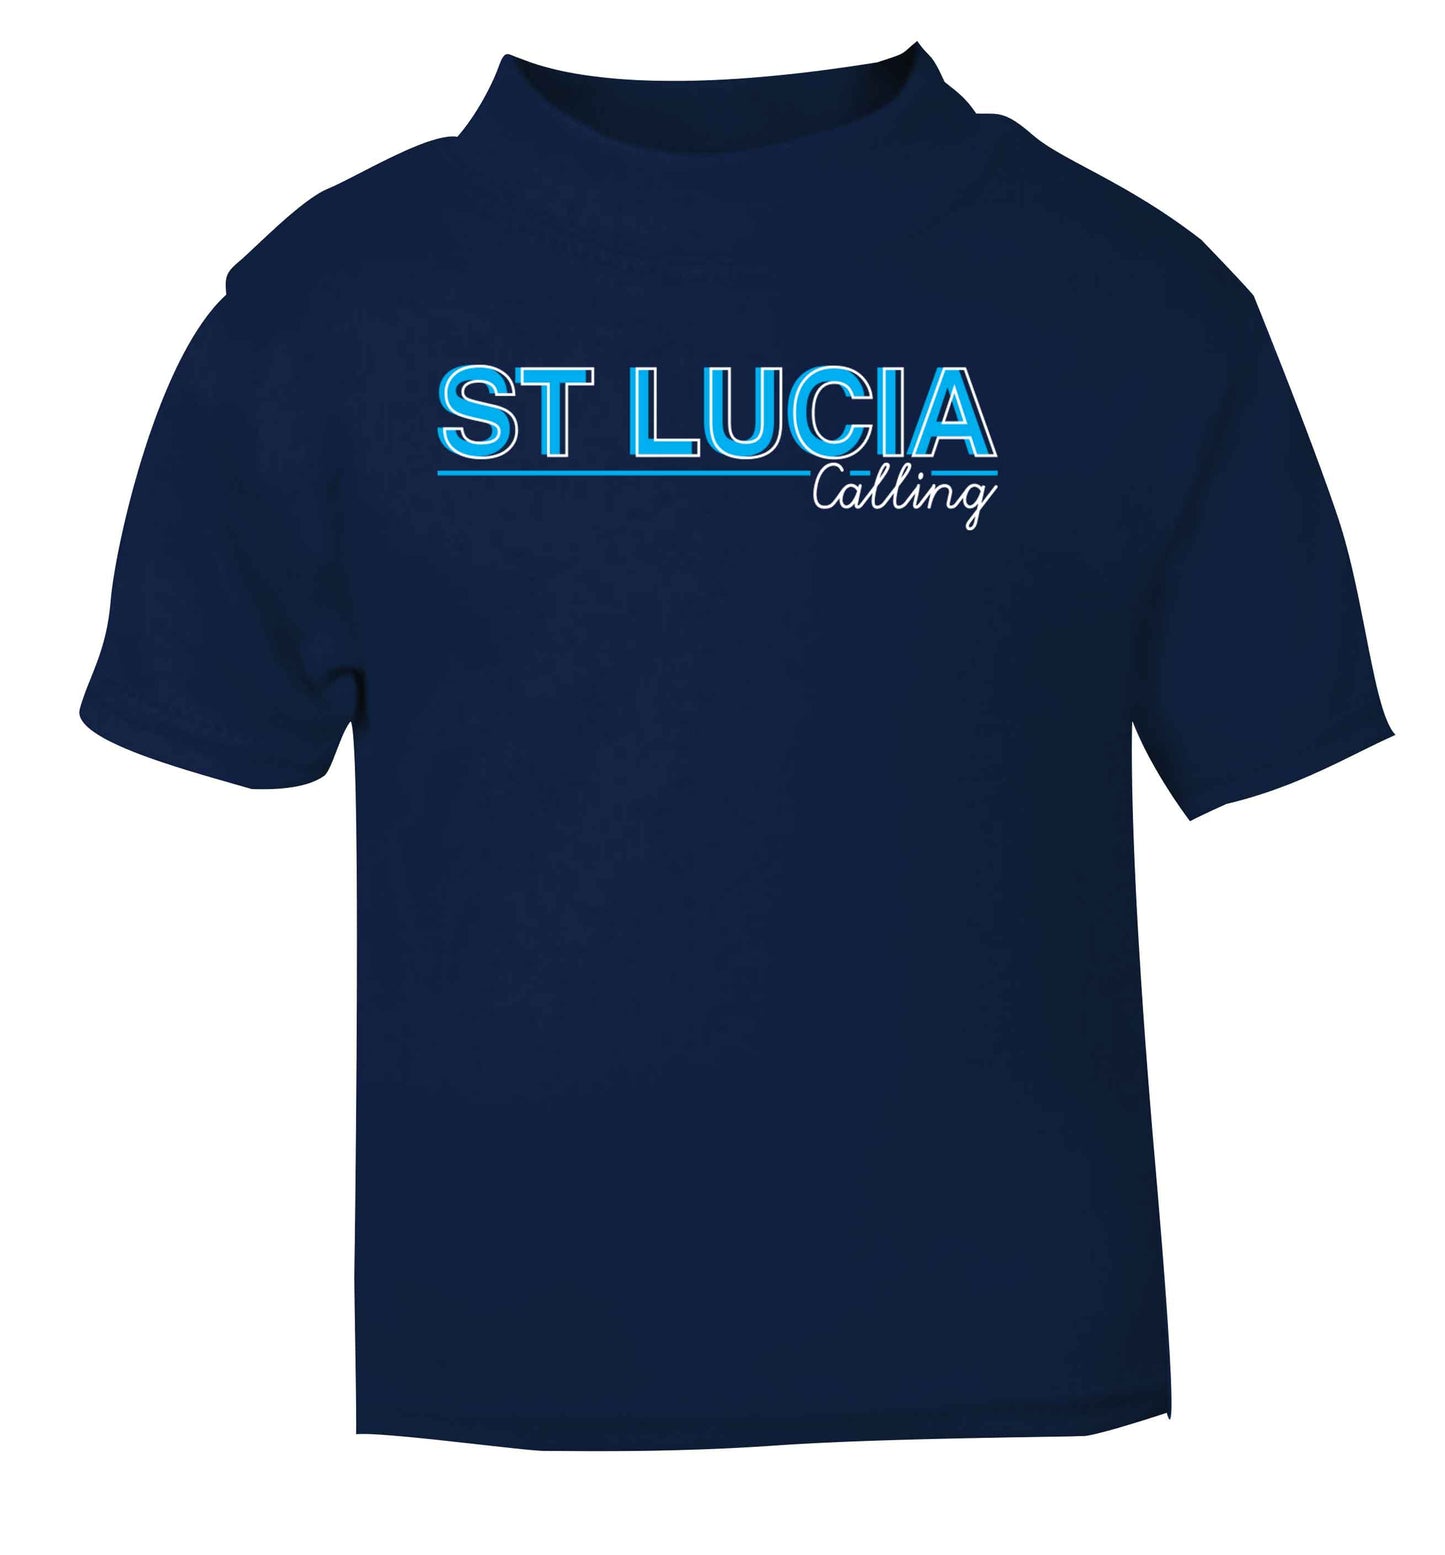 St Lucia calling navy Baby Toddler Tshirt 2 Years